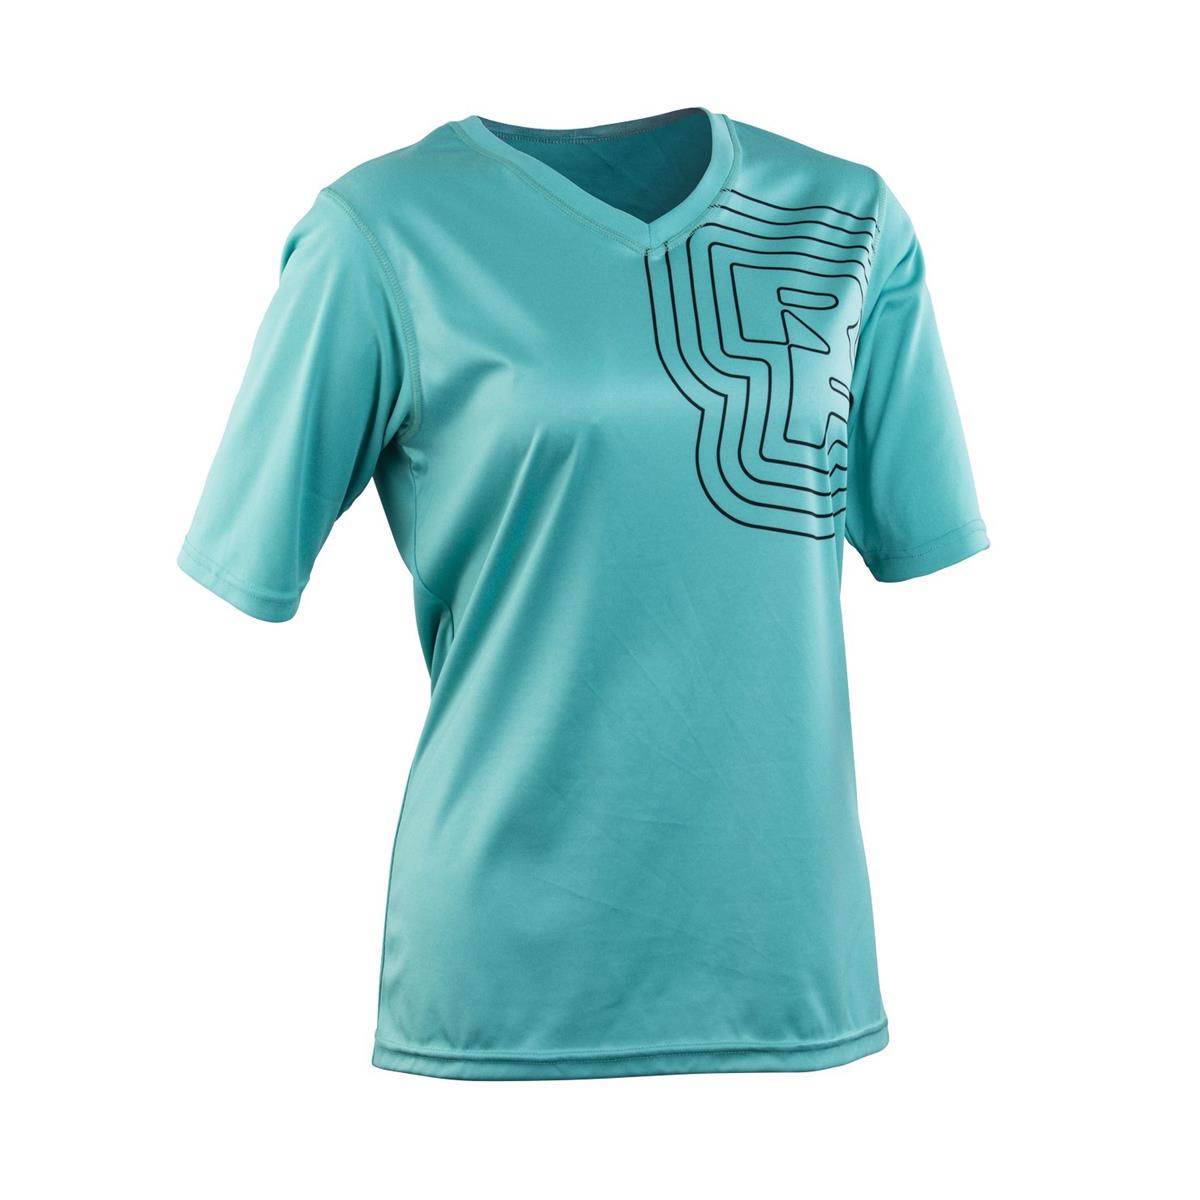 Race Face Femme Maillot VTT Manches Courtes Charlie Turquoise